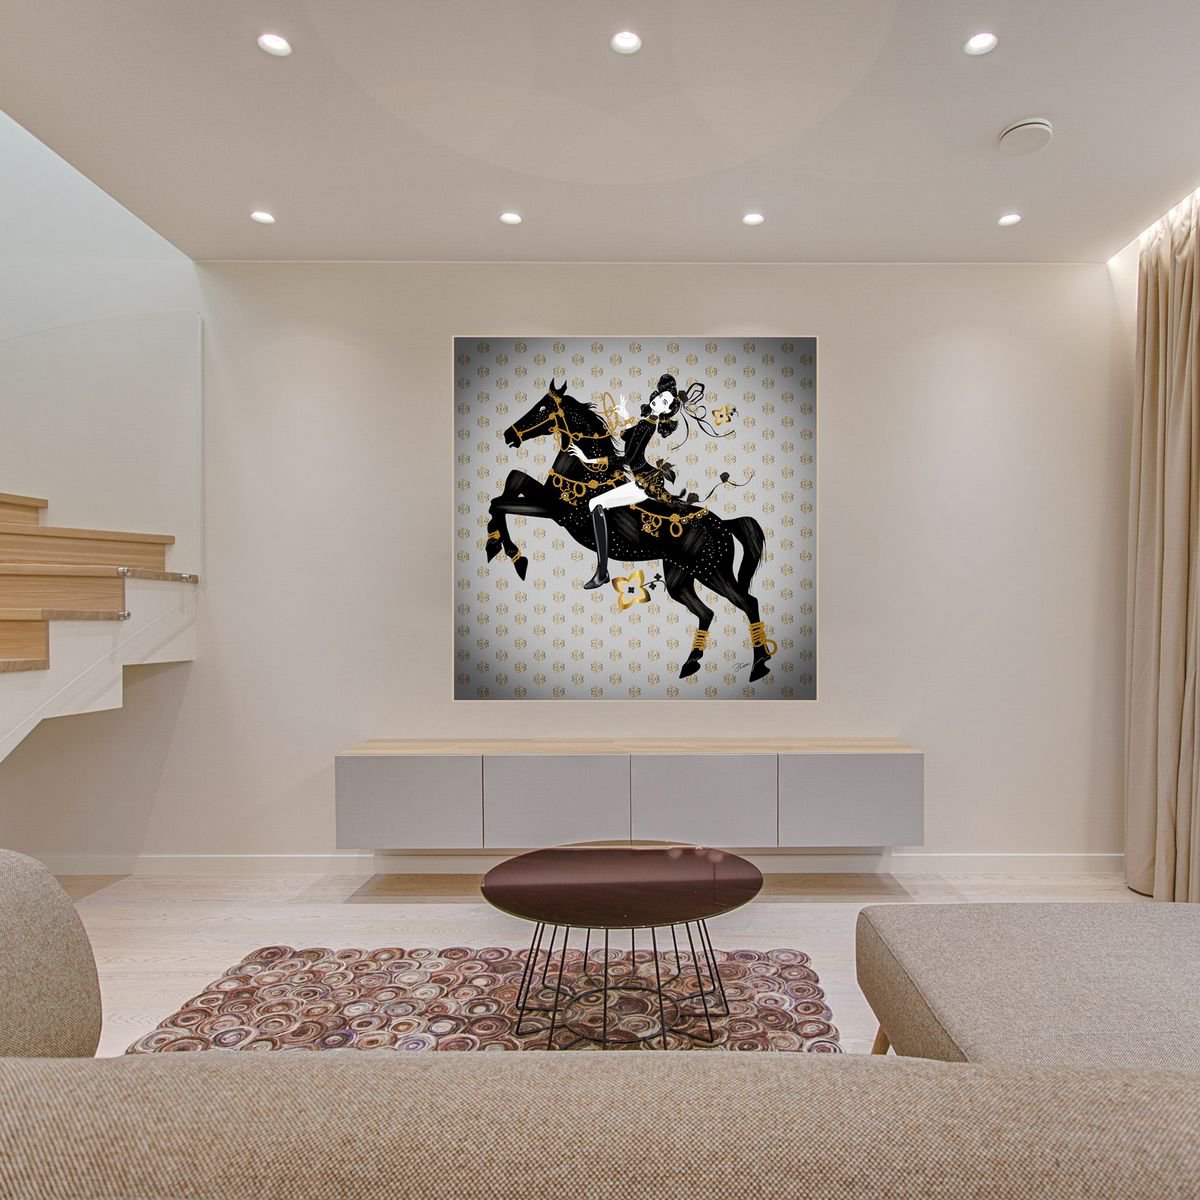 Burlesque Star - Horse - Dressage - Riding - Equestrian - Art Deco - XL Large Painting by Artemisia